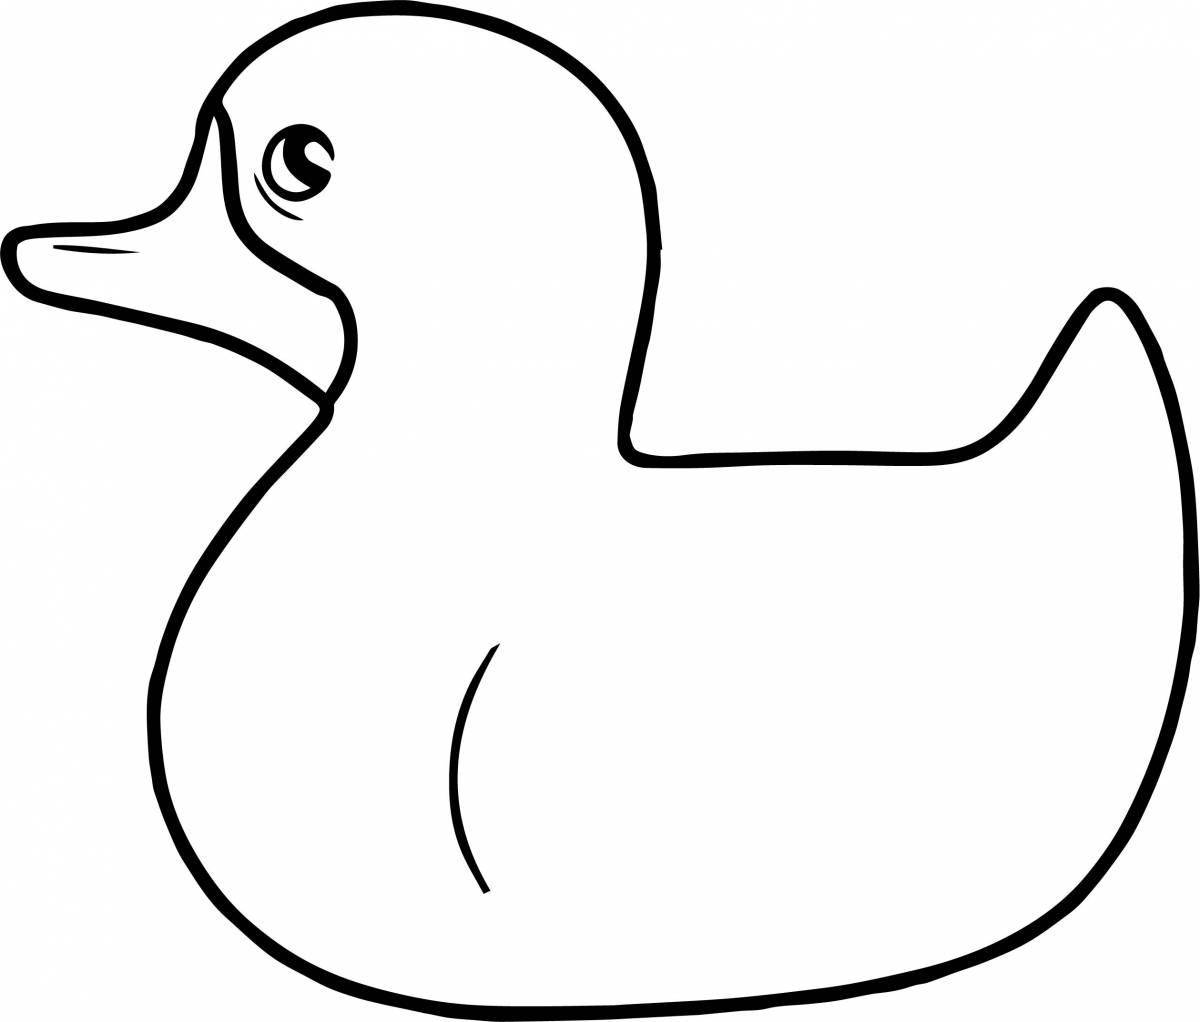 Lalafanfan duck colorful coloring page